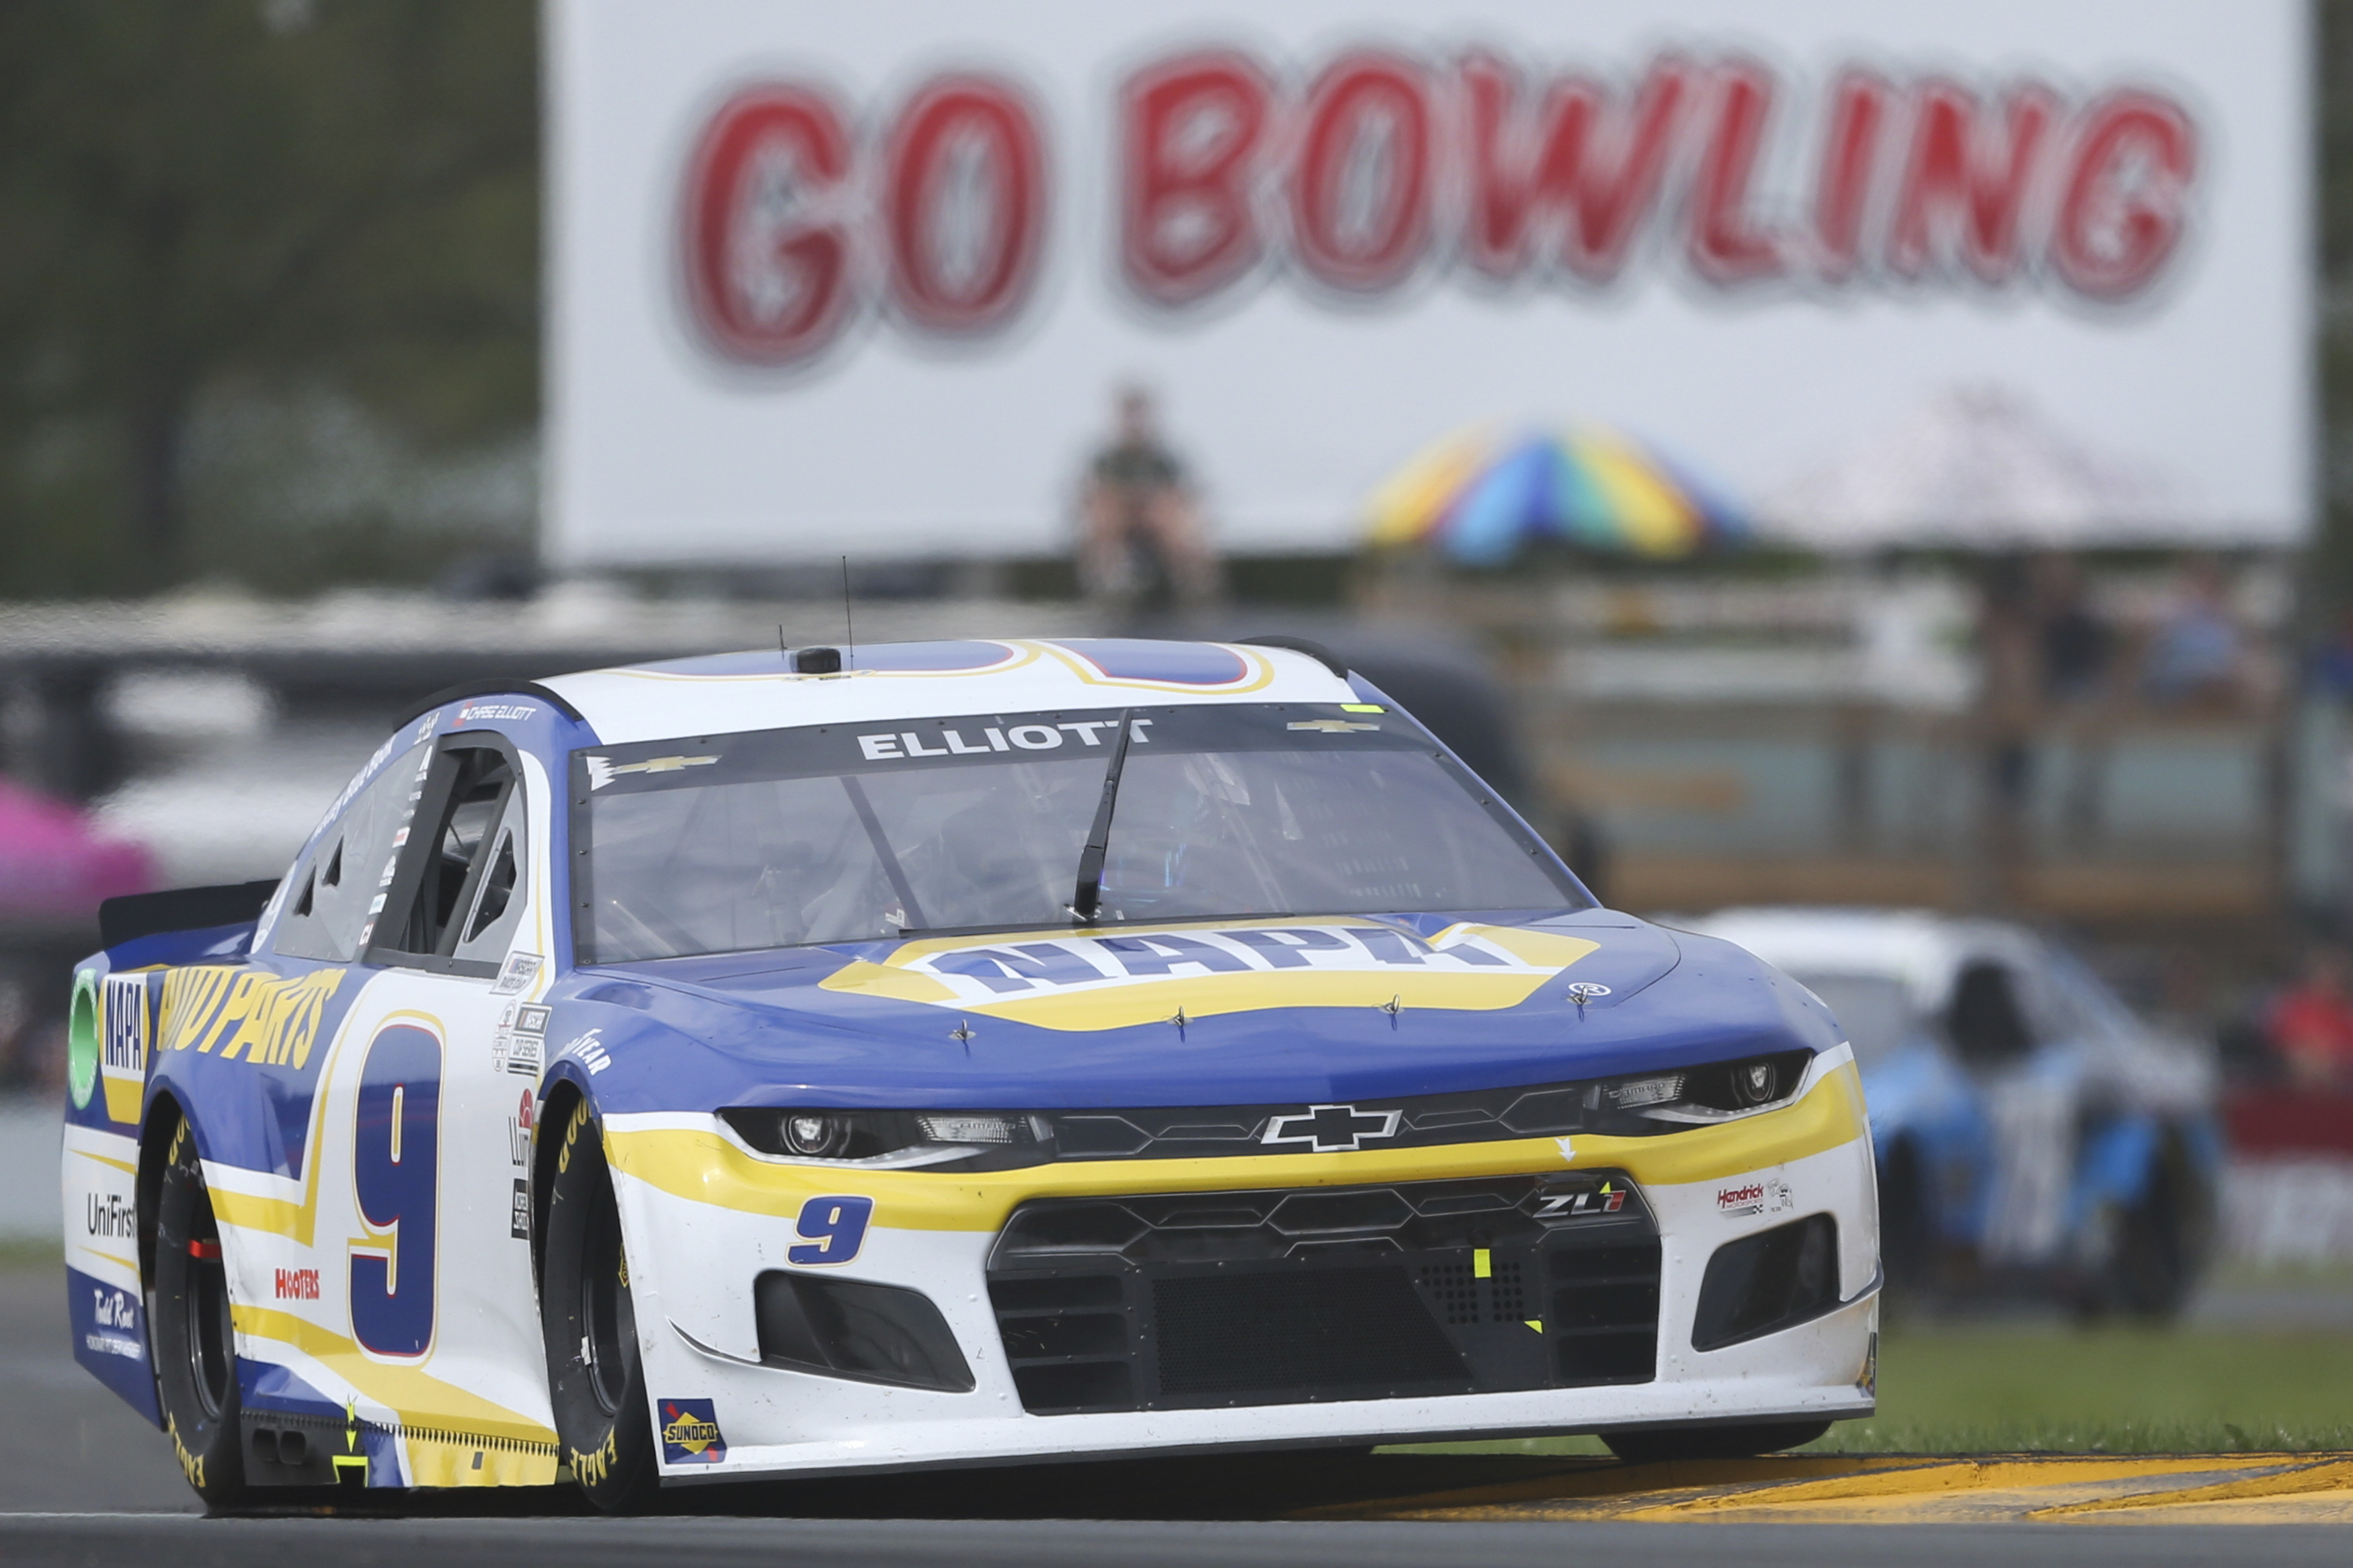 How to Watch Go Bowling at the Glen - NASCAR Cup Series Channel, Stream, Preview